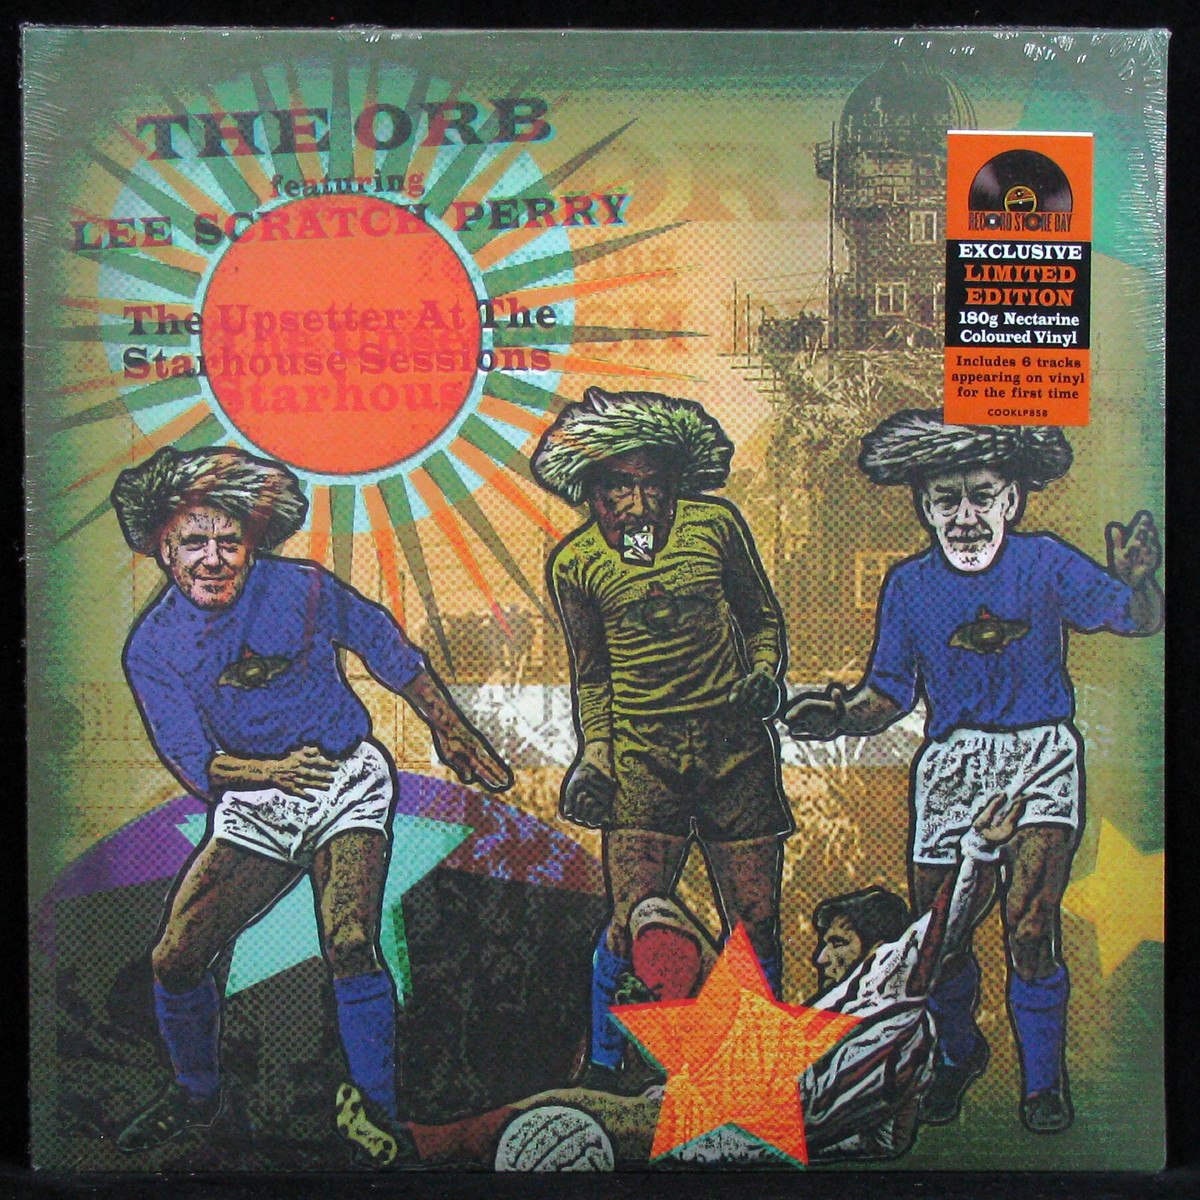 LP ORB / Lee Scratch Perry — Upsetter At The Starhouse Sessions (coloured vinyl) фото